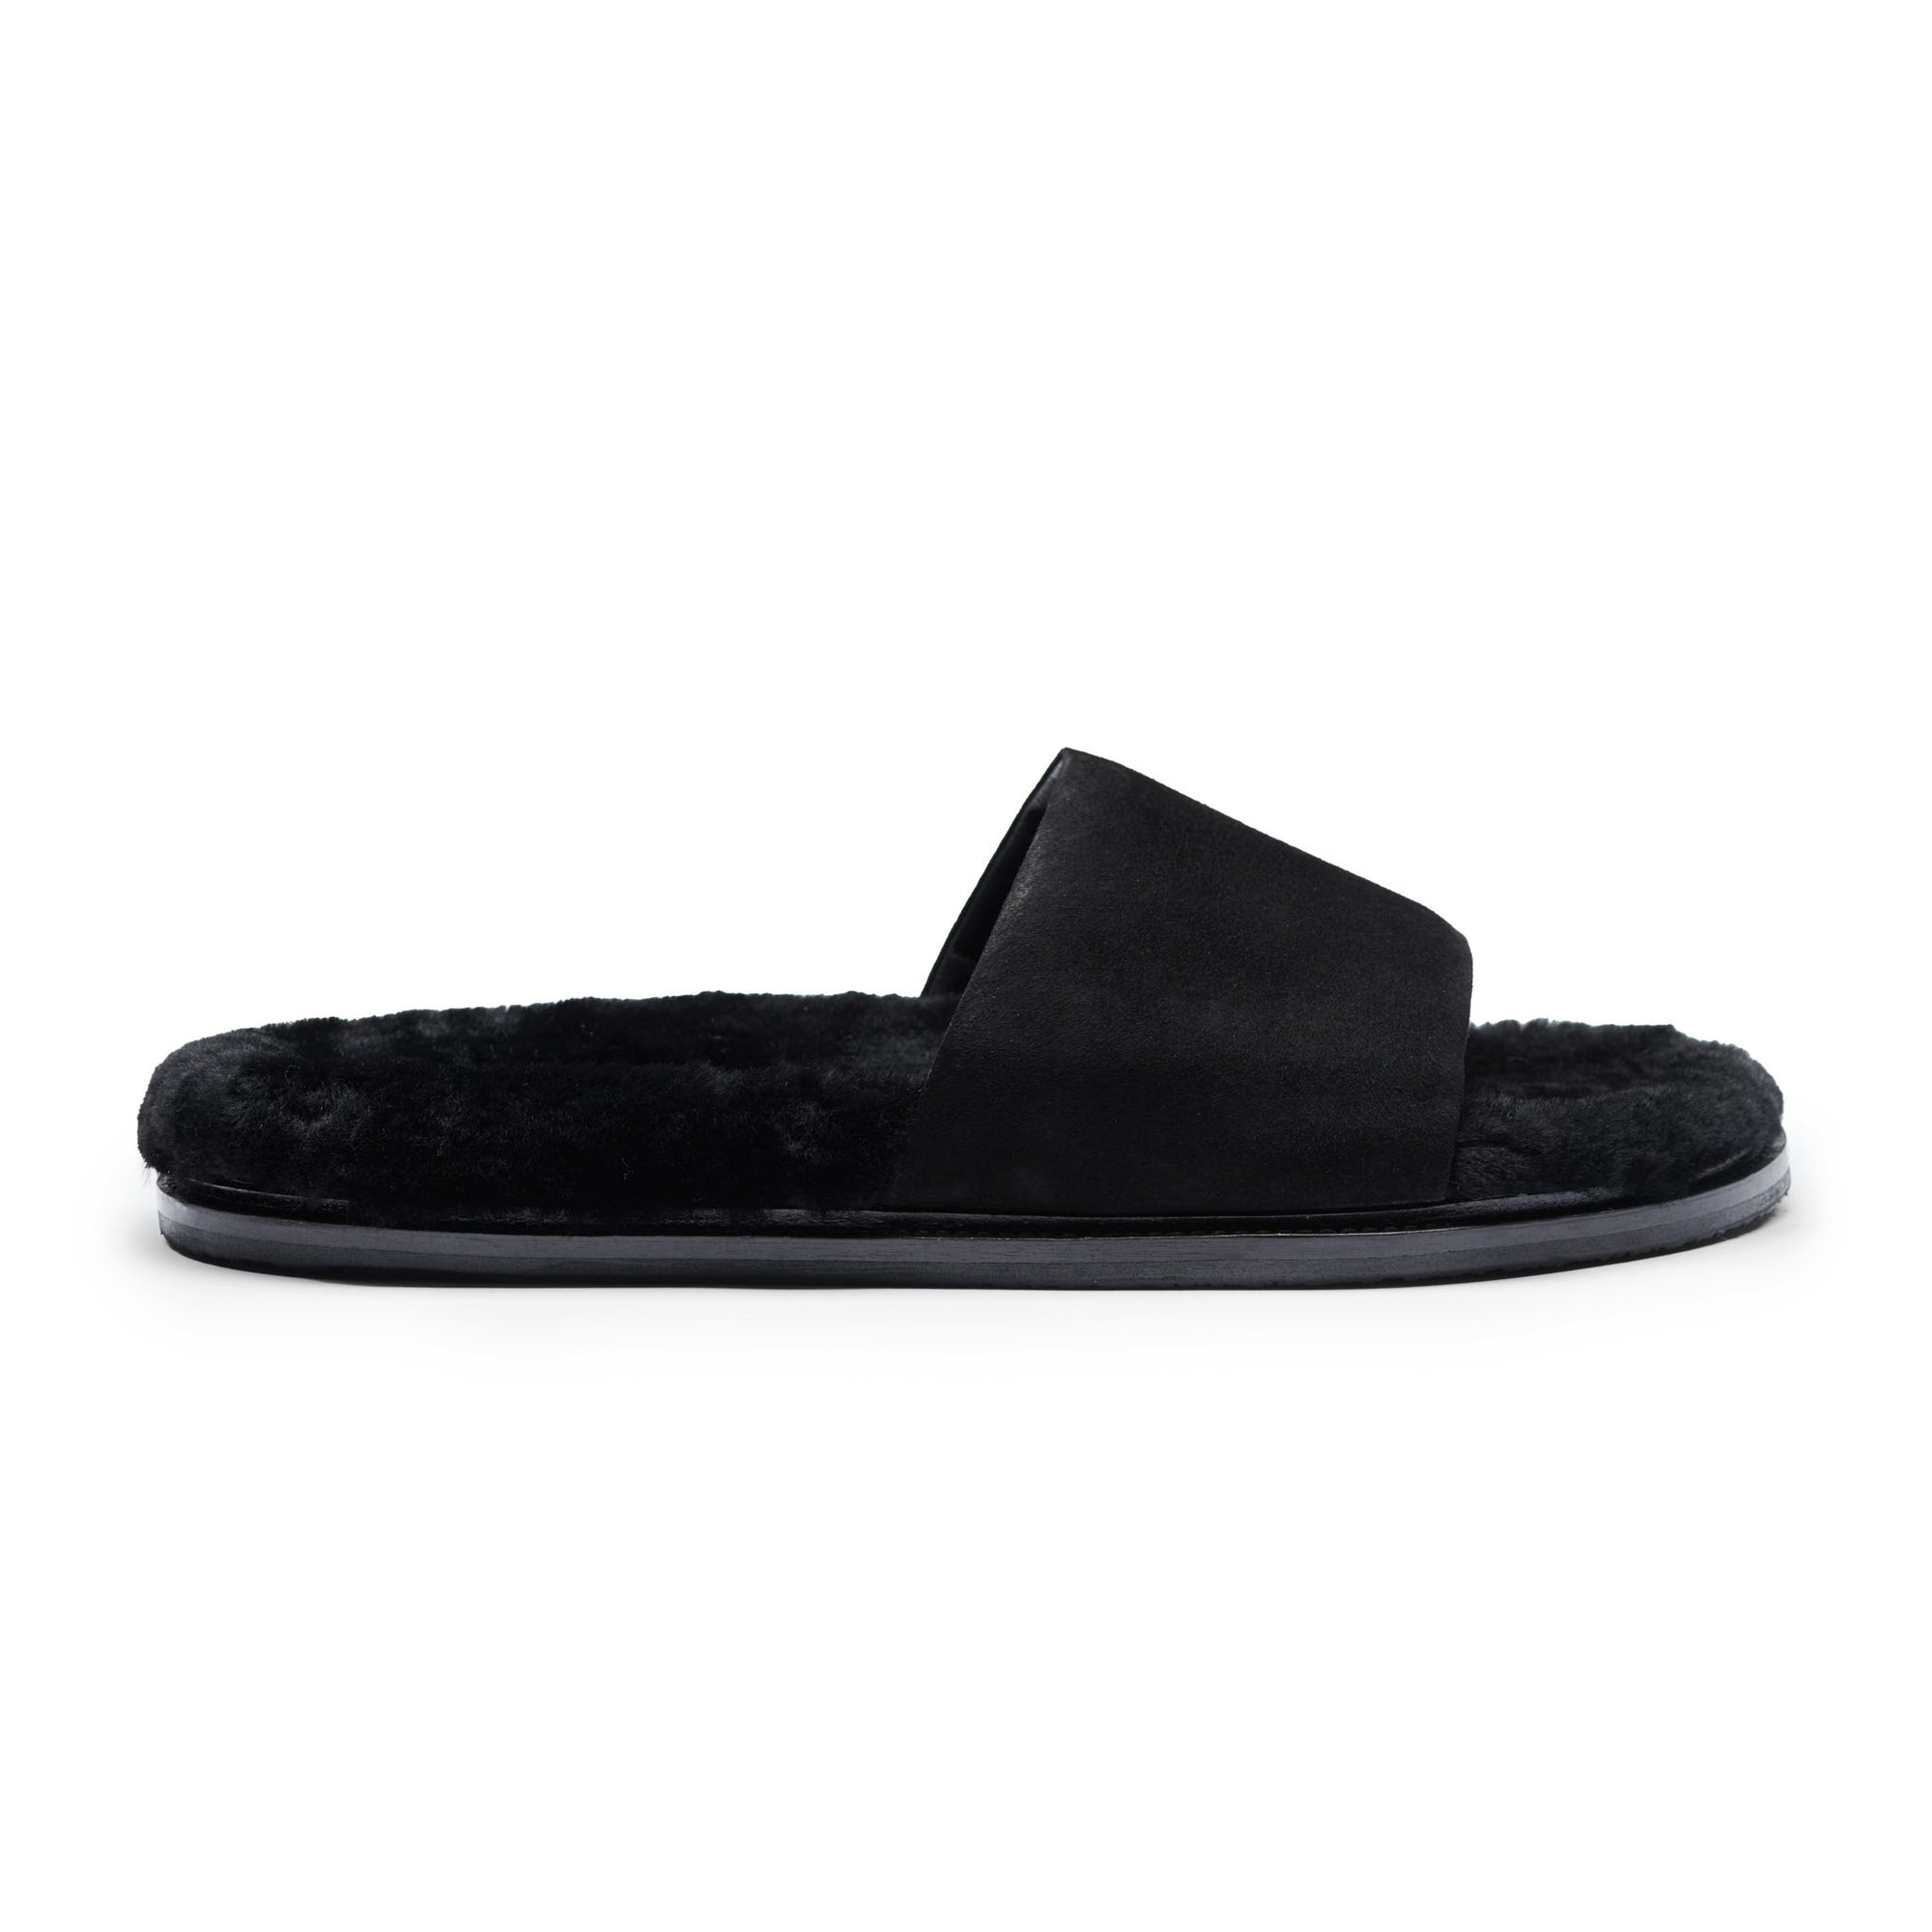 Inabo Men's Patio slipper in black suede and shearling in profile